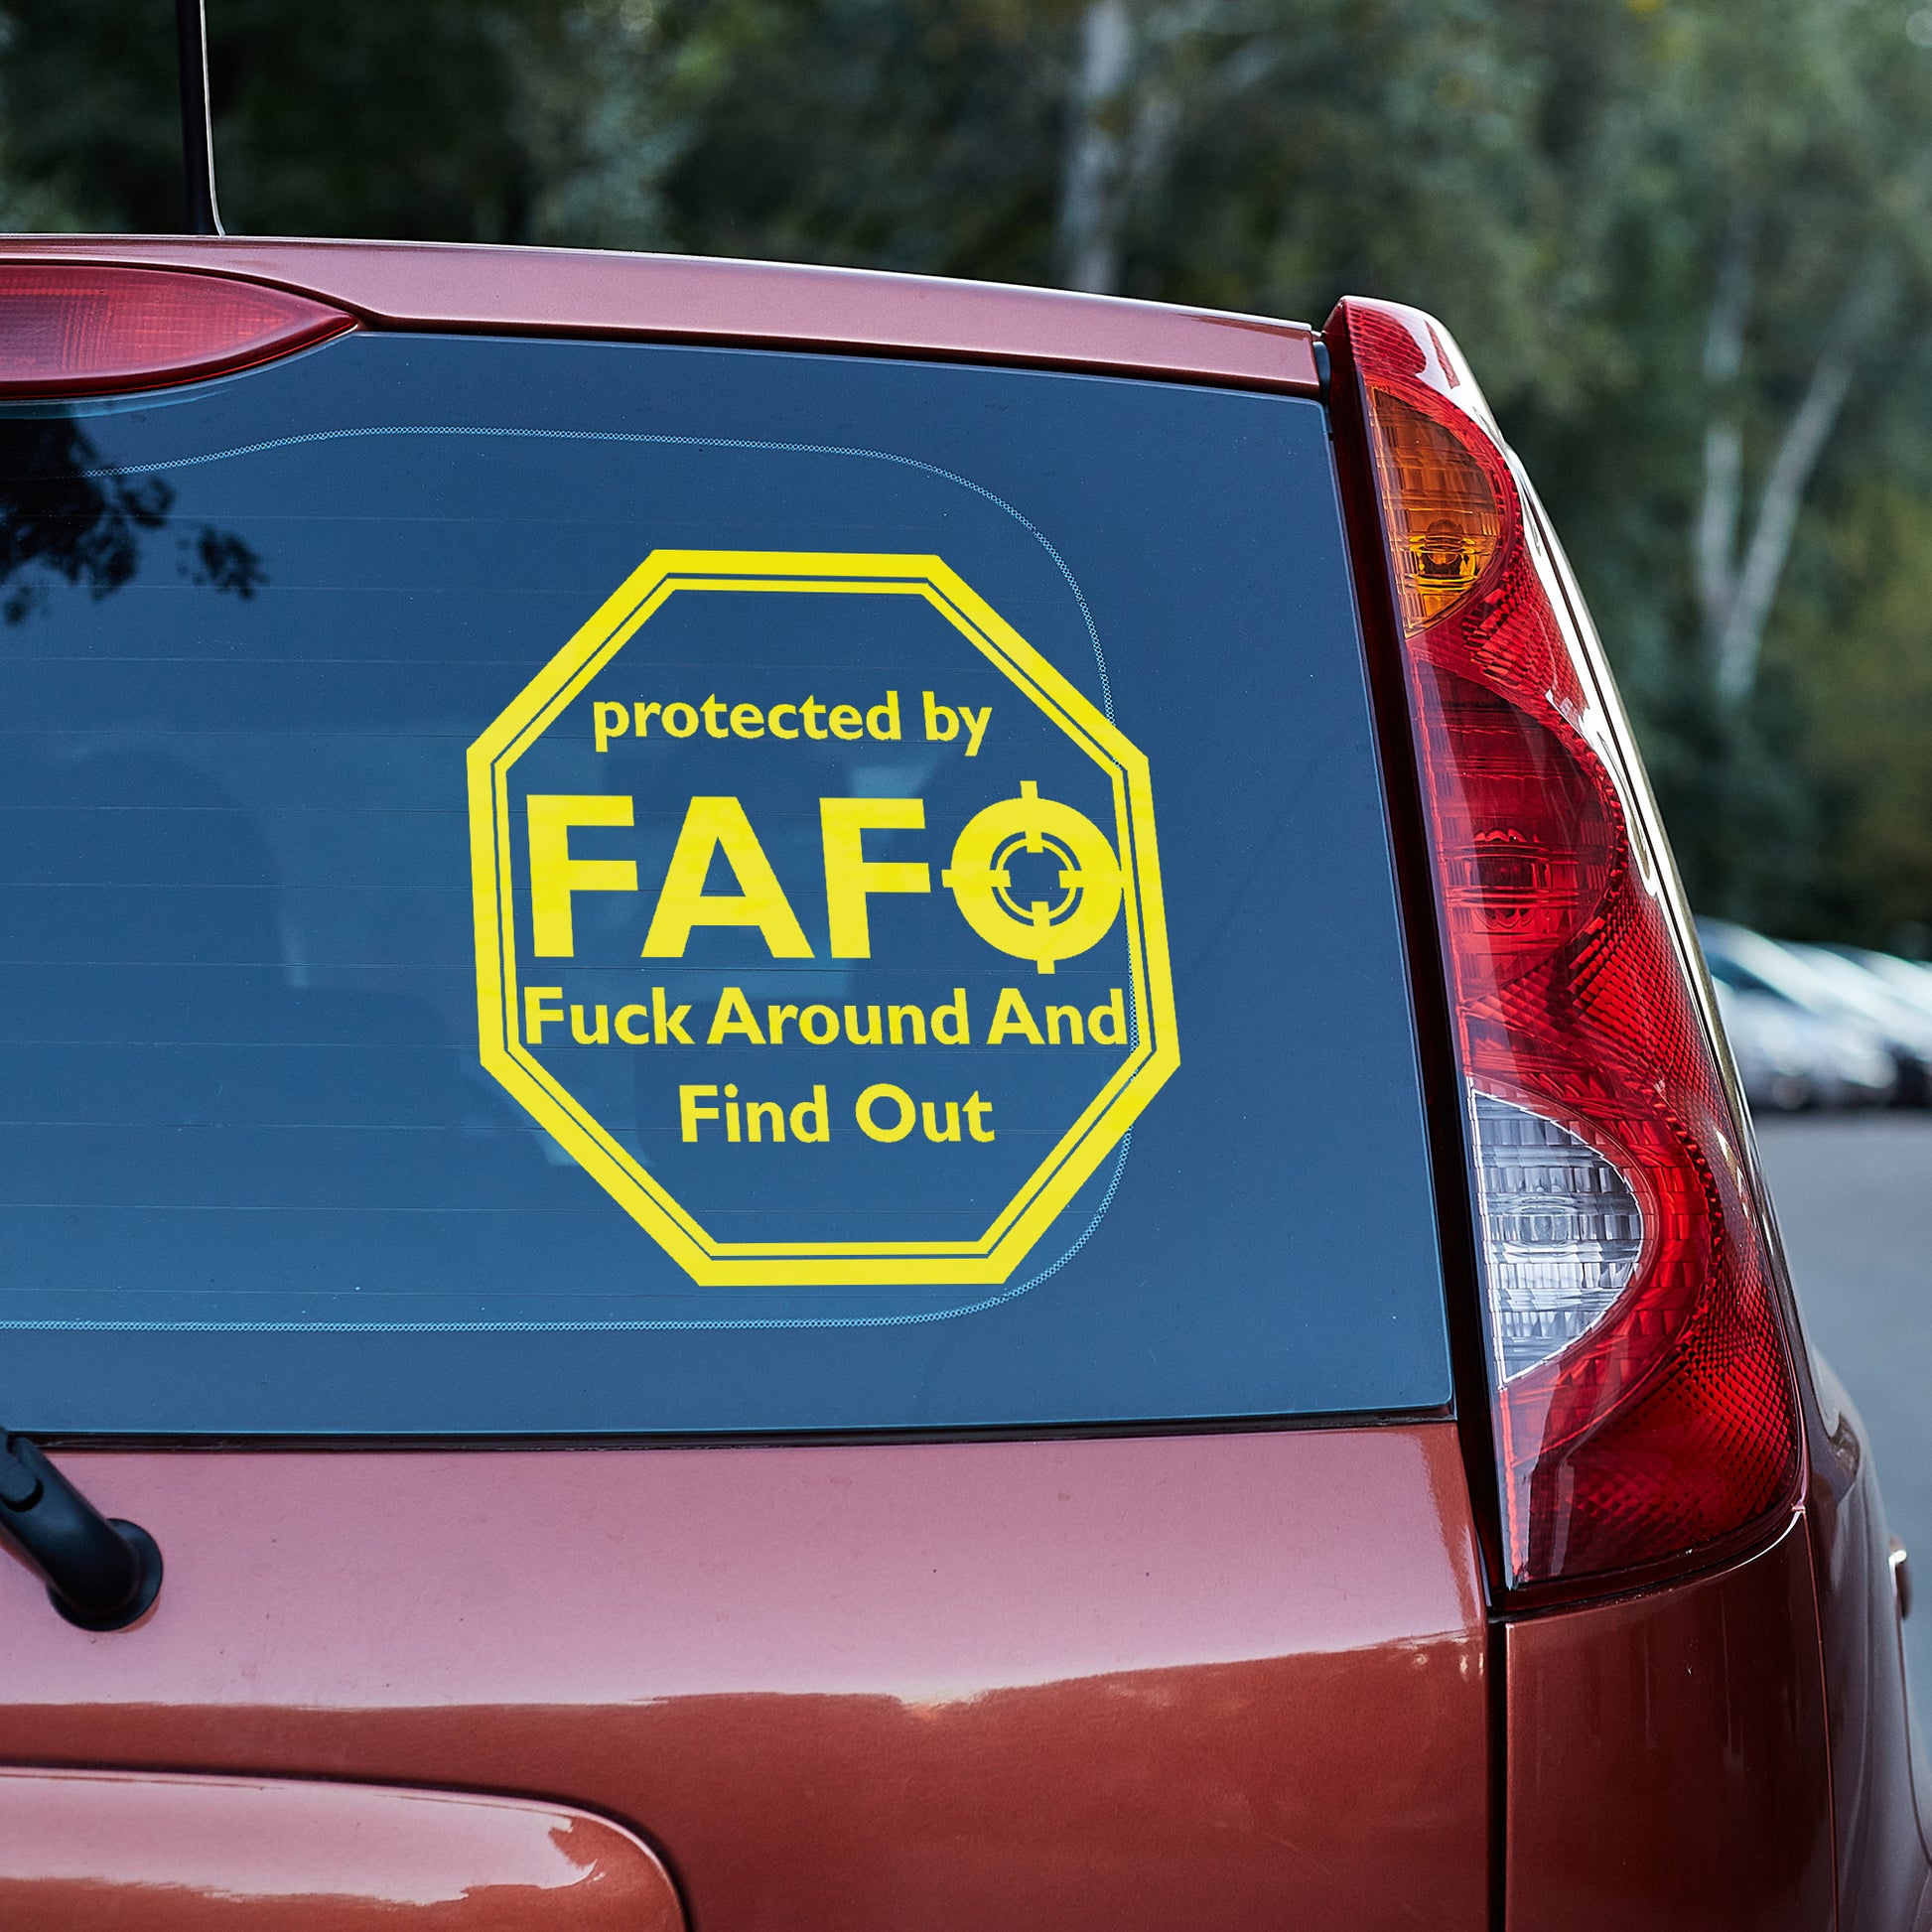 Protected by FAFO- Vinyl decal 2A boss gift car decor car lovers dads day gift dont tread on me F around and find out FAAFO FAFO gift for dad gift for grandpa gift for her gift for him gift for husband gift for mom gift for sister gift for wife liberty moms gift screw around and find out Unique gift Vinyl Vinyl decals vinyl sticker Vinyl stickers window decal window sticker